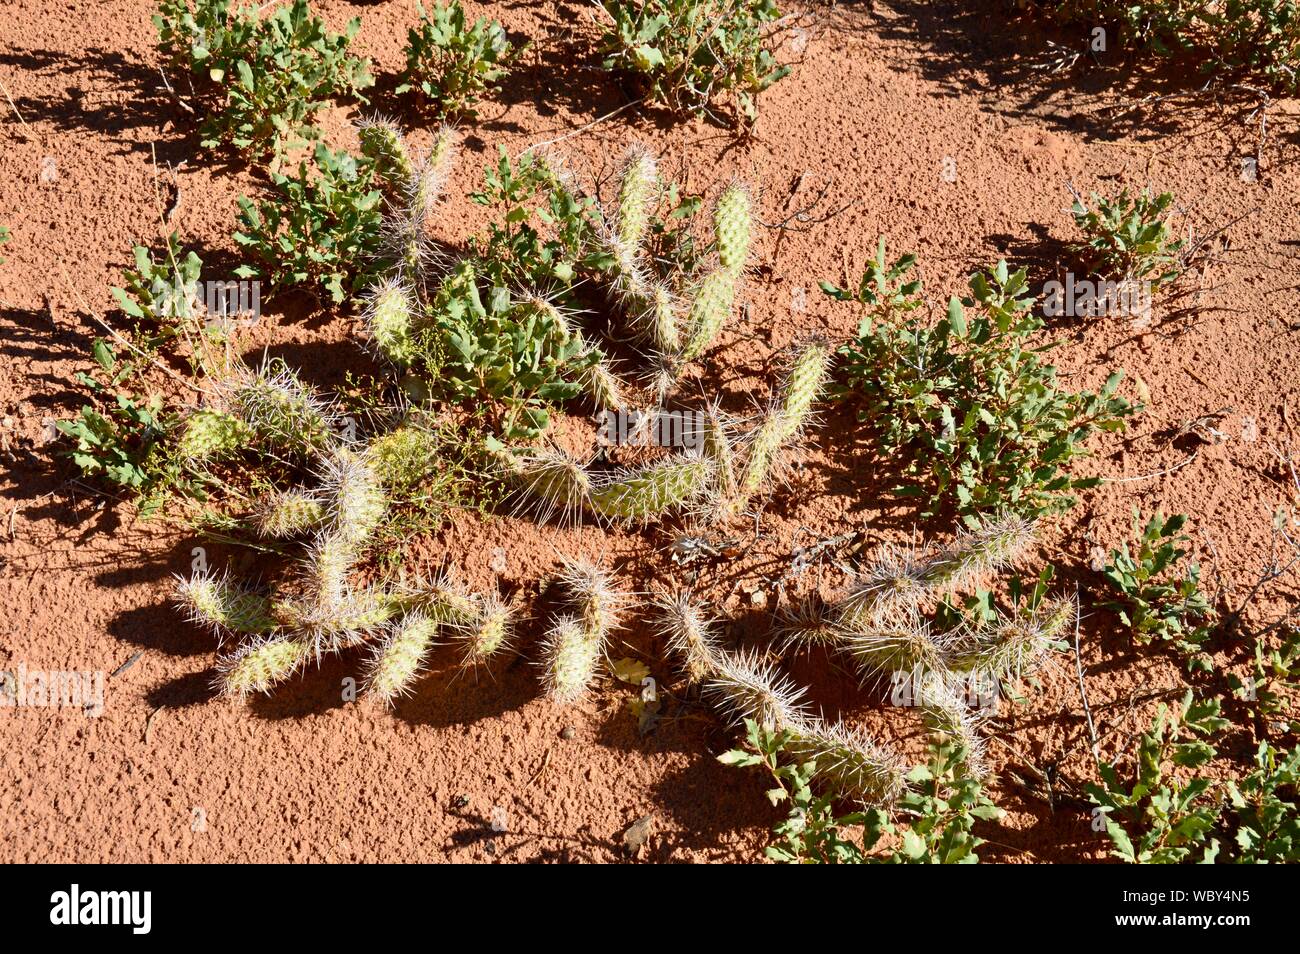 divers plants in the desert, Stock Photo